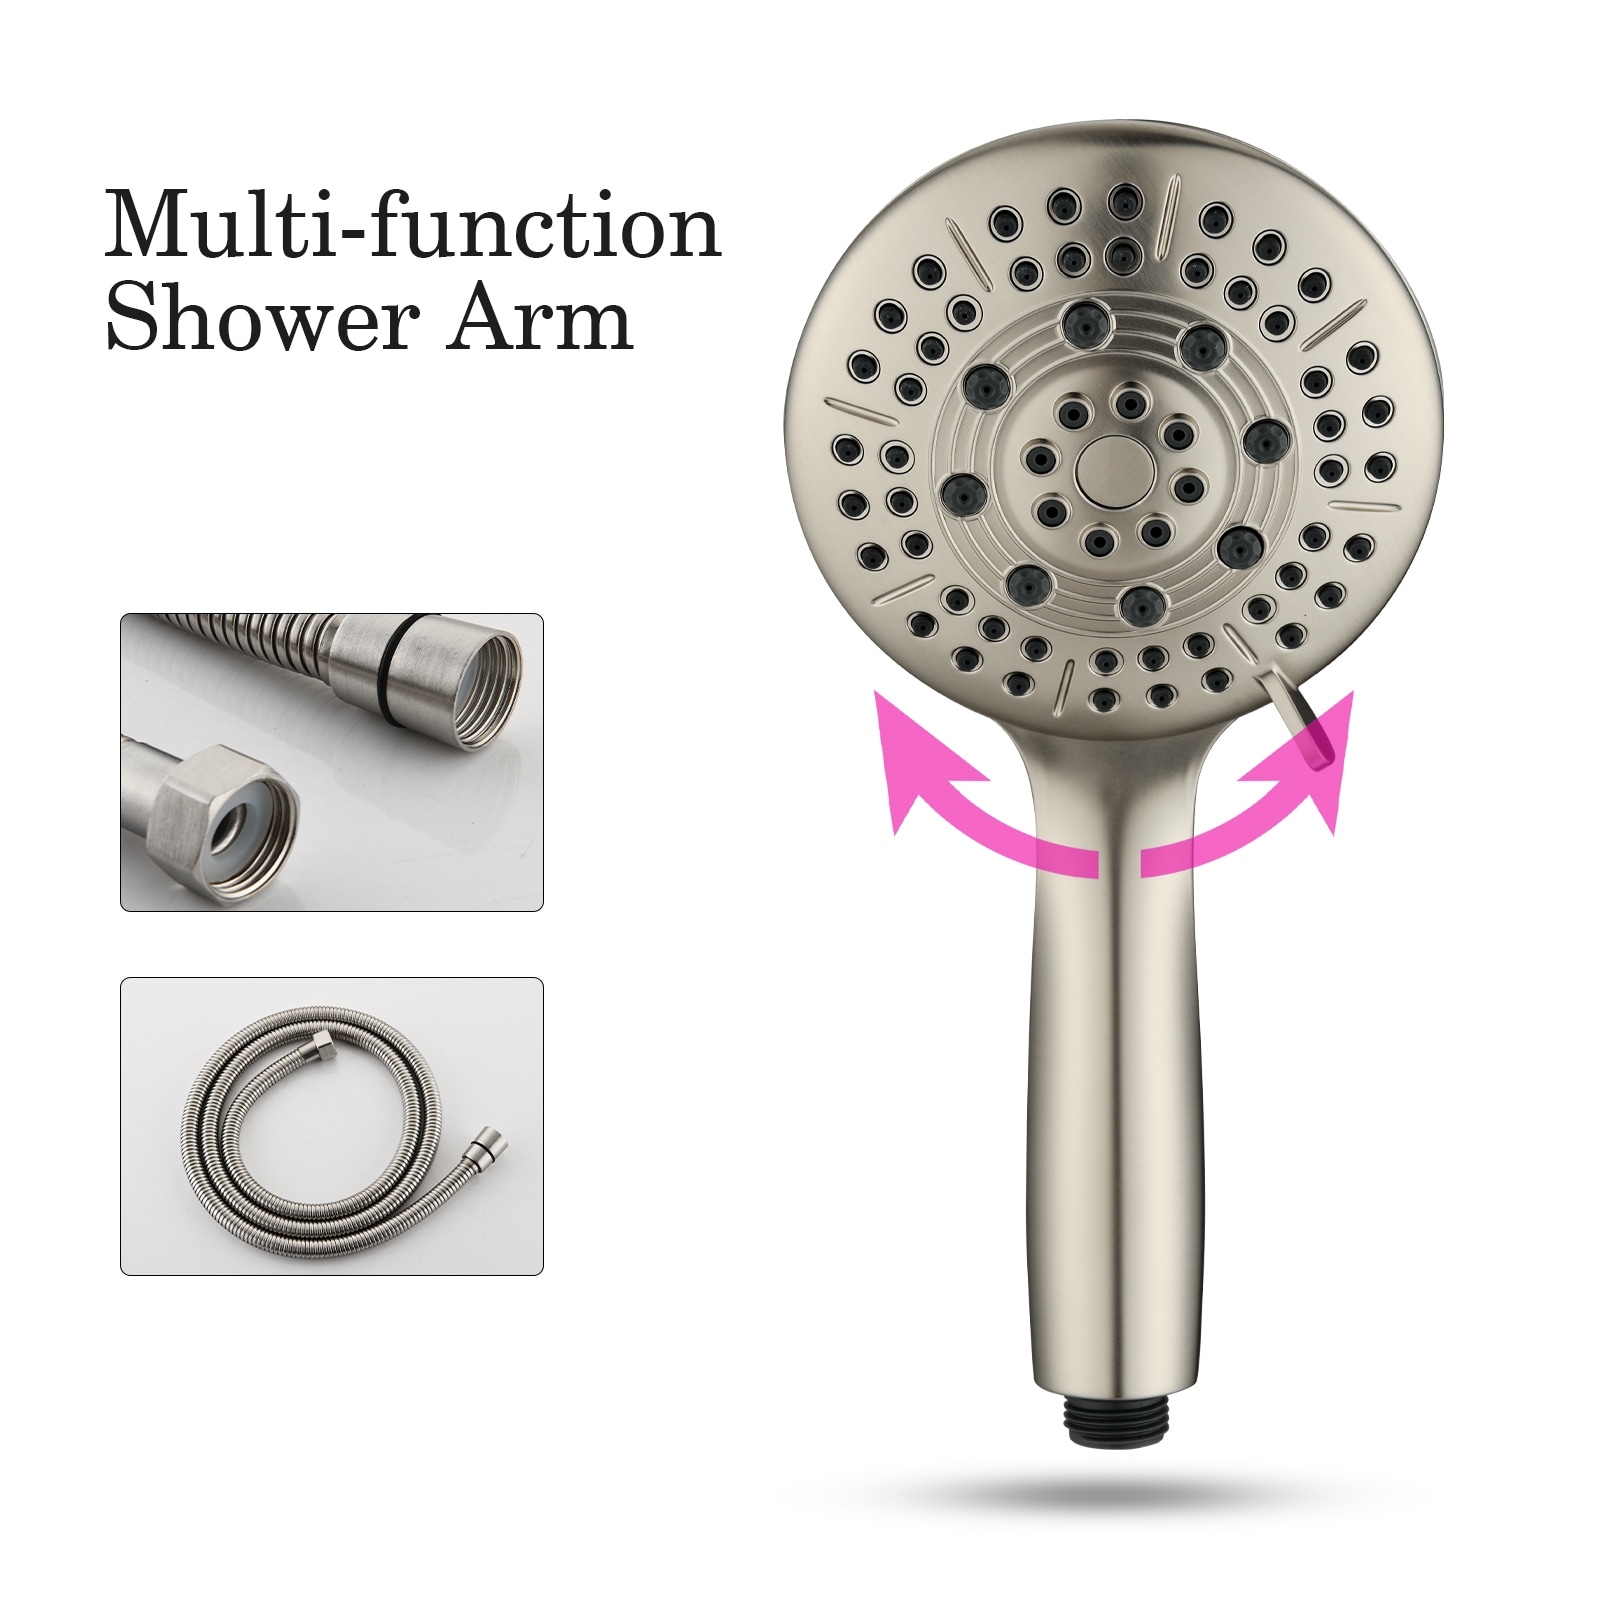 PROOX 5-Spray 8 in. Round Shower System Kit with Hand Shower and Adjustable Slide Bar Soap Dish in Brushed Nickel AE103BN